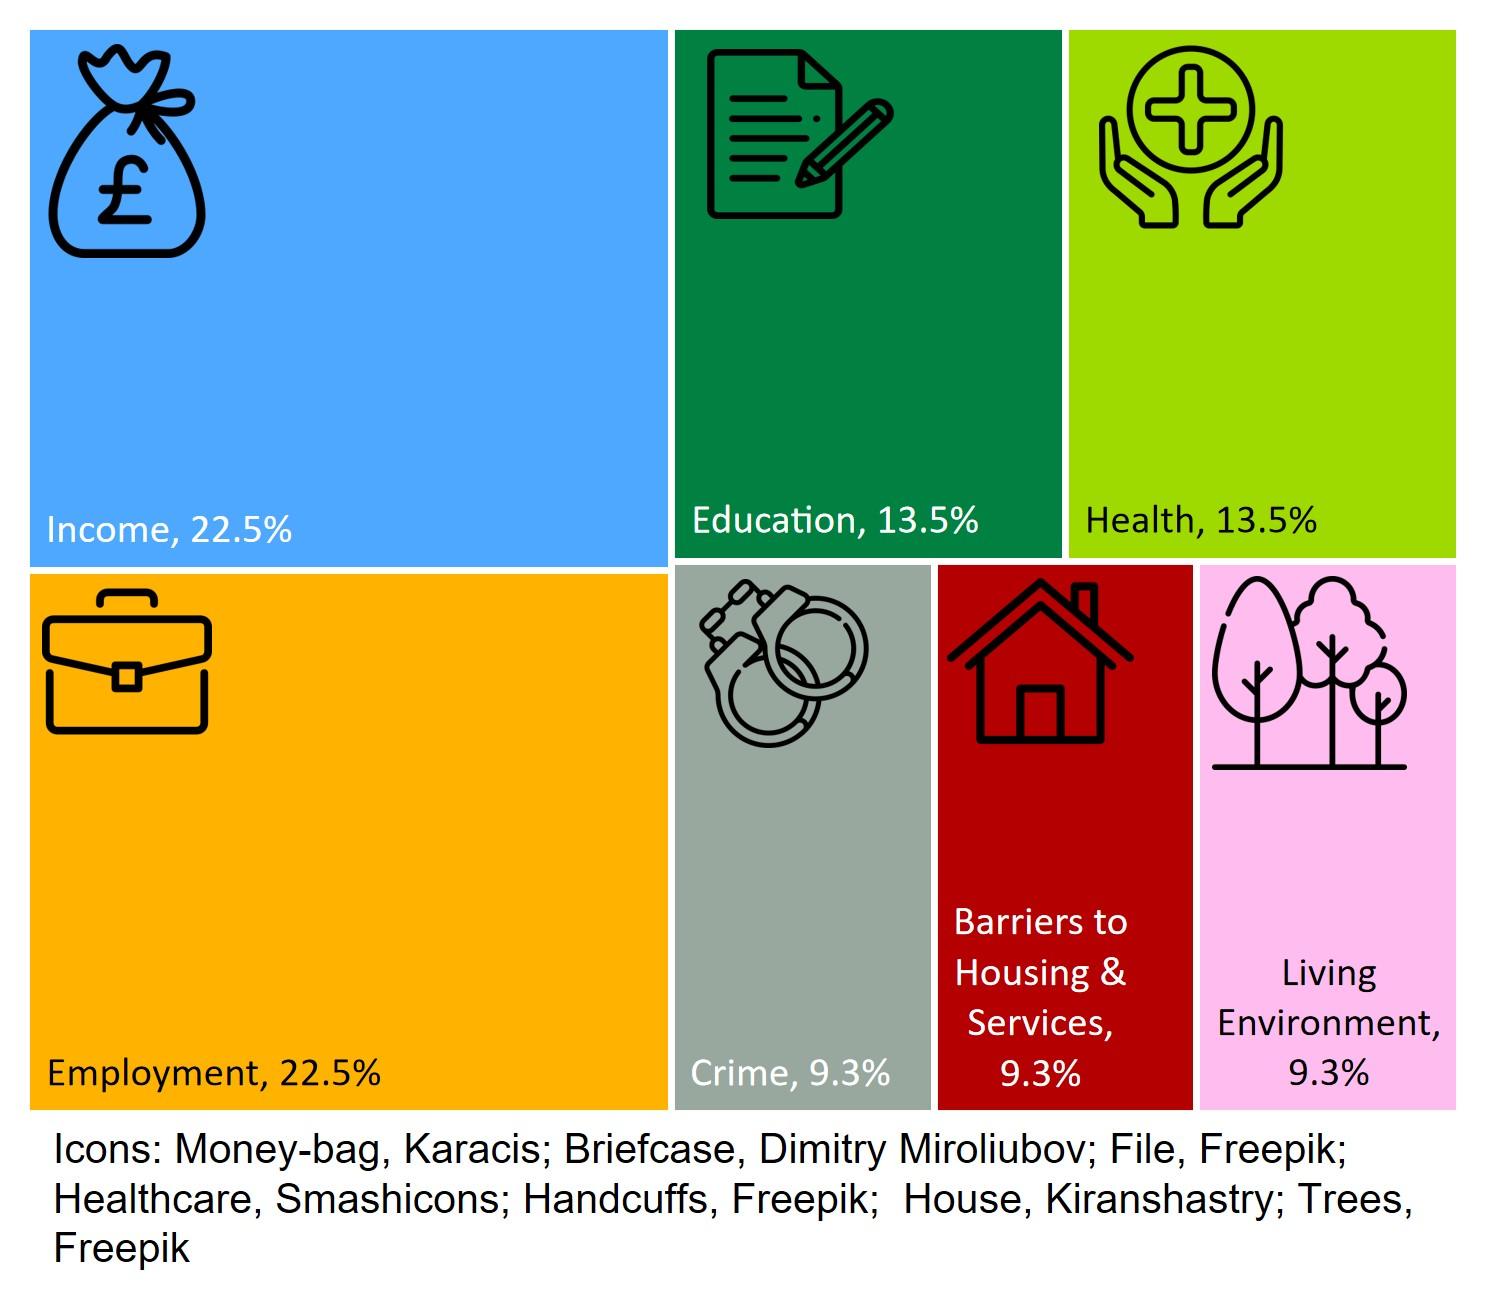 Imd domains in proportion they are combined: Income Deprivation (22.5%); Employment Deprivation (22.5%); Education, Skills and Training Deprivation (13.5%); Health Deprivation and Disability (13.5%); Crime (9.3%); 	Barriers to Housing and Services (9.3%); Living Environment Deprivation (9.3%)